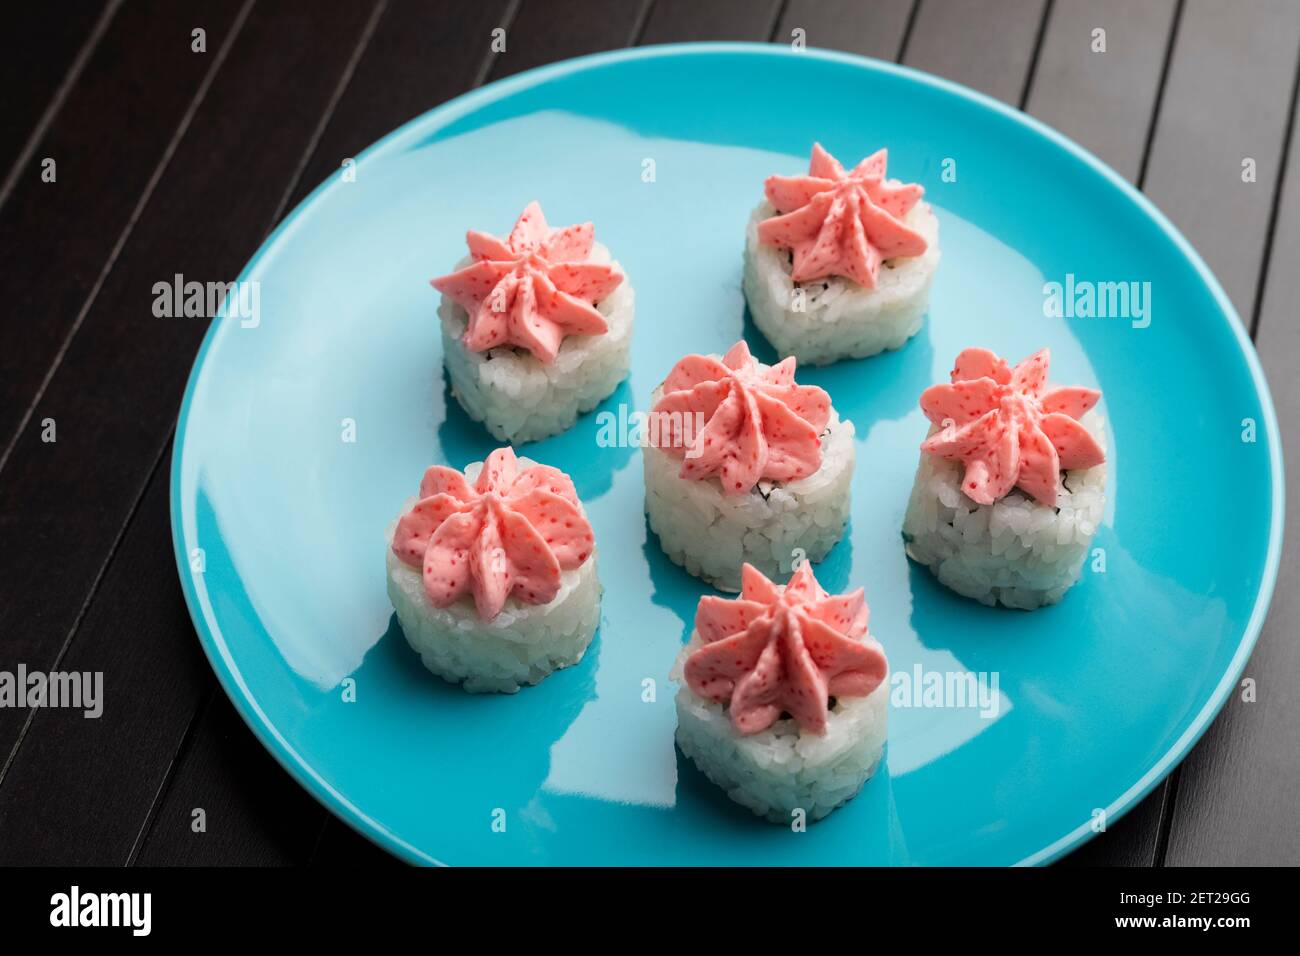 rolls with pink lava sauce on a blue plate, on a wooden table. Serving Japanese food Stock Photo